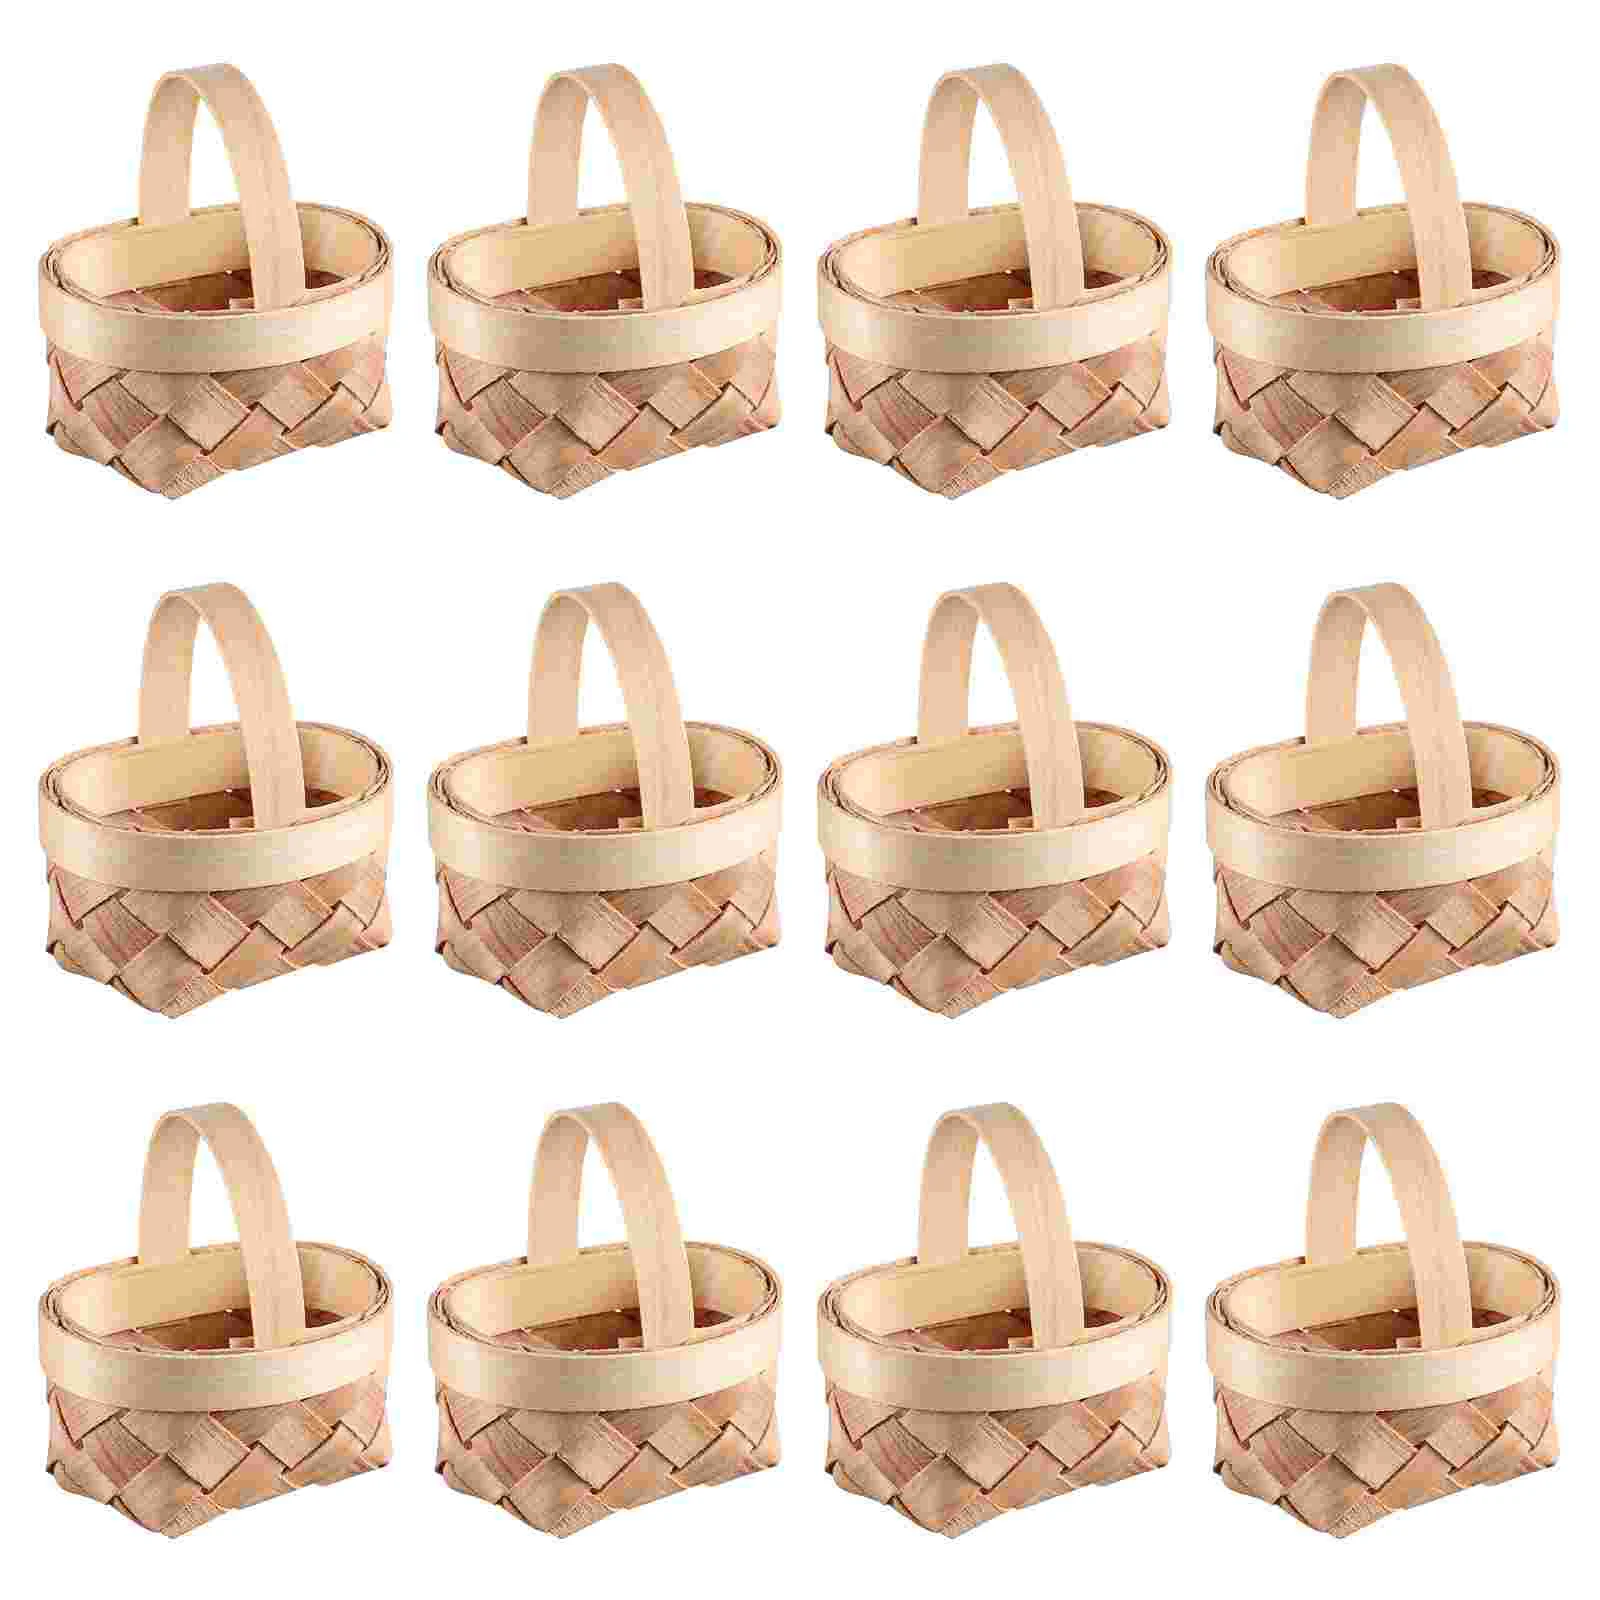 

12 Pcs Picnic Basket Table Weave Wicker Baskets Gifts Fruit Woven Miniature Flower Vegetable Small Tiny Holder